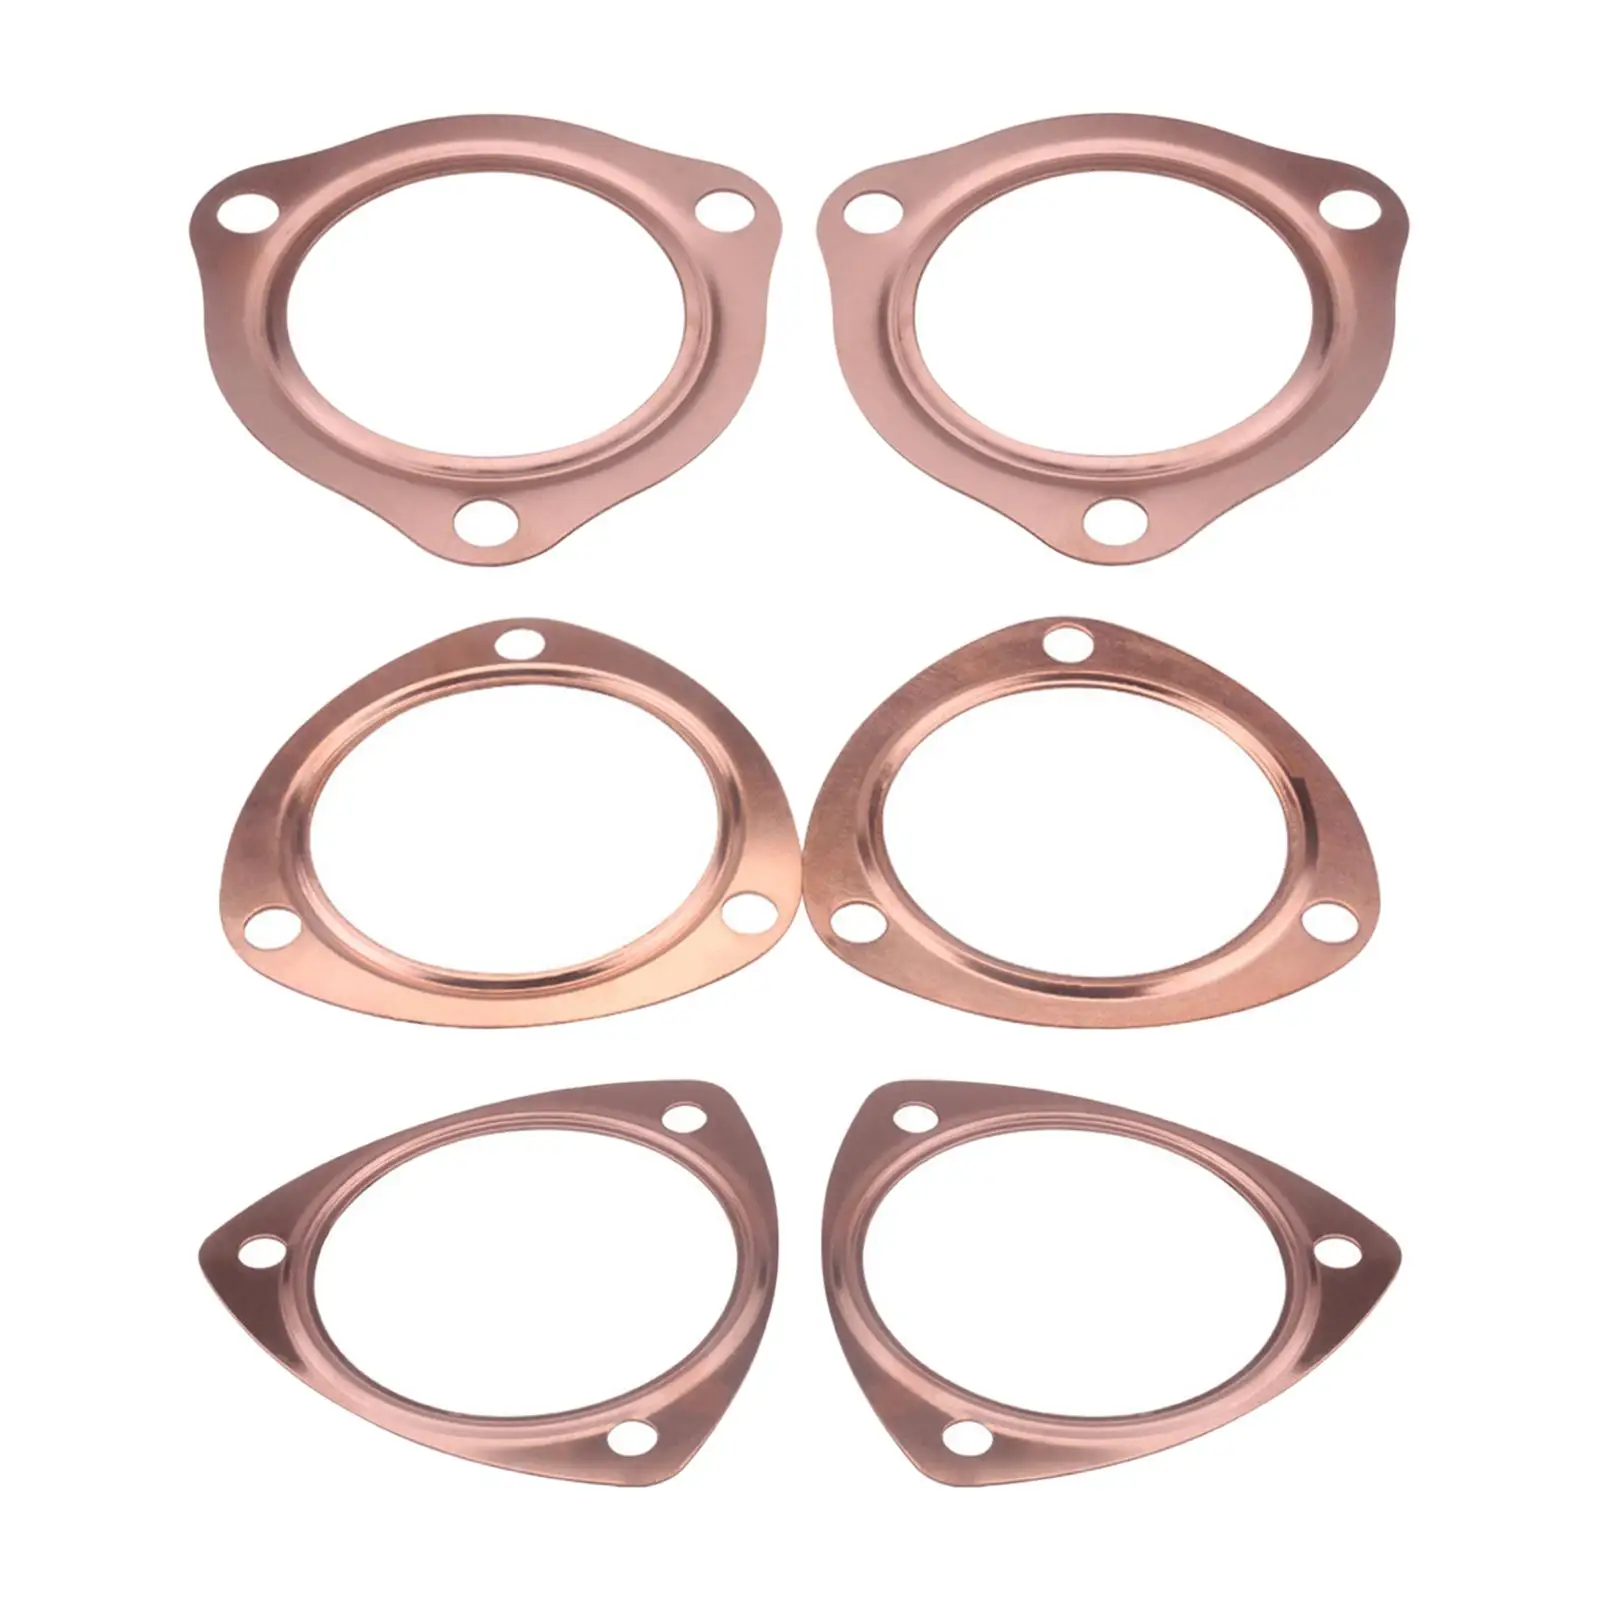 Header Collector Gaskets Durable Exhaust Gaskets for Sbc 302 350 454 Accessory